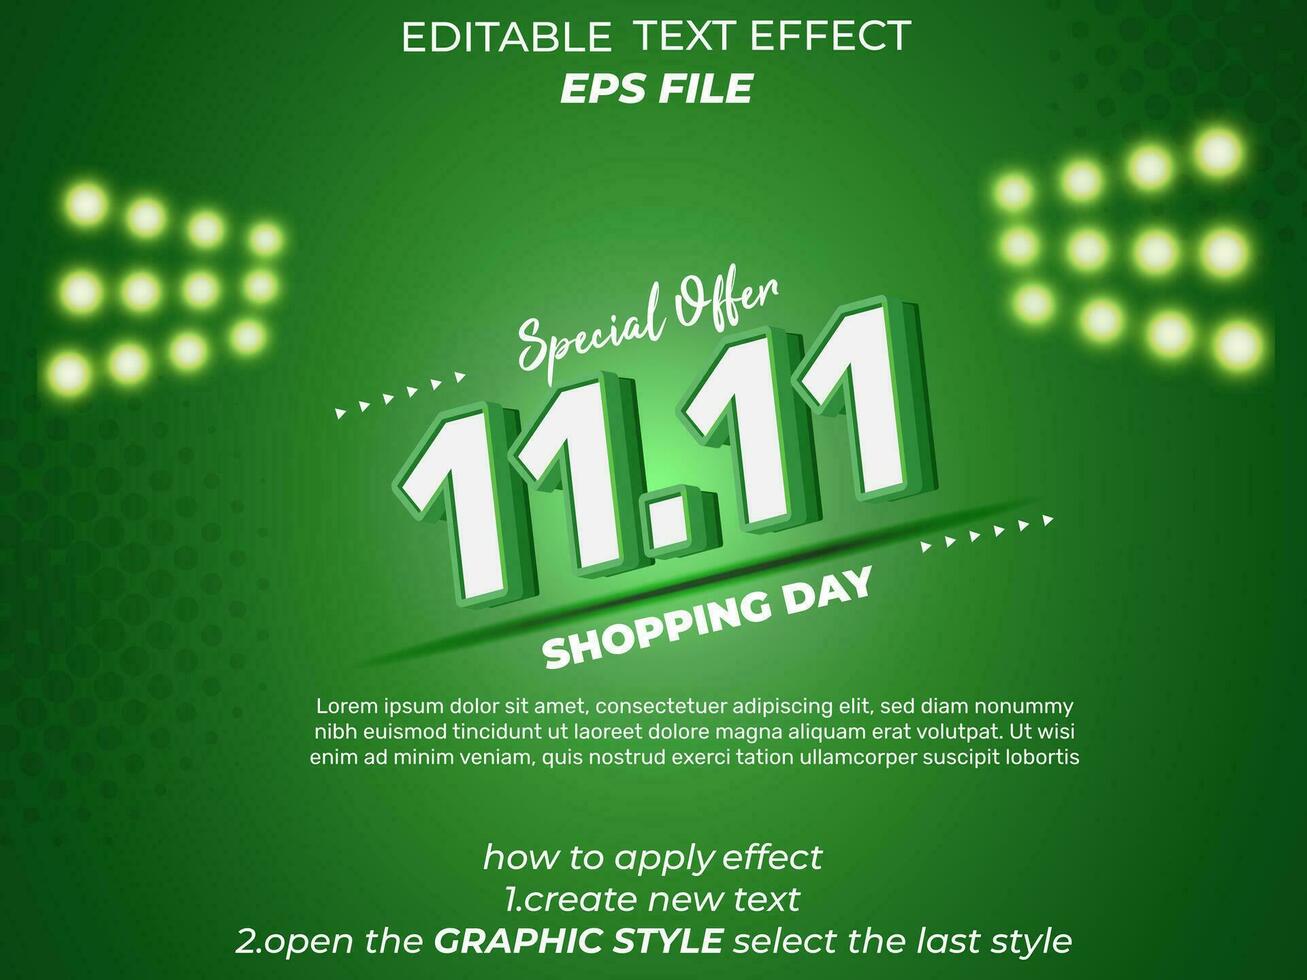 11.11 shopping day anniversary text effect, 3d text, editable for commercial promotion vector